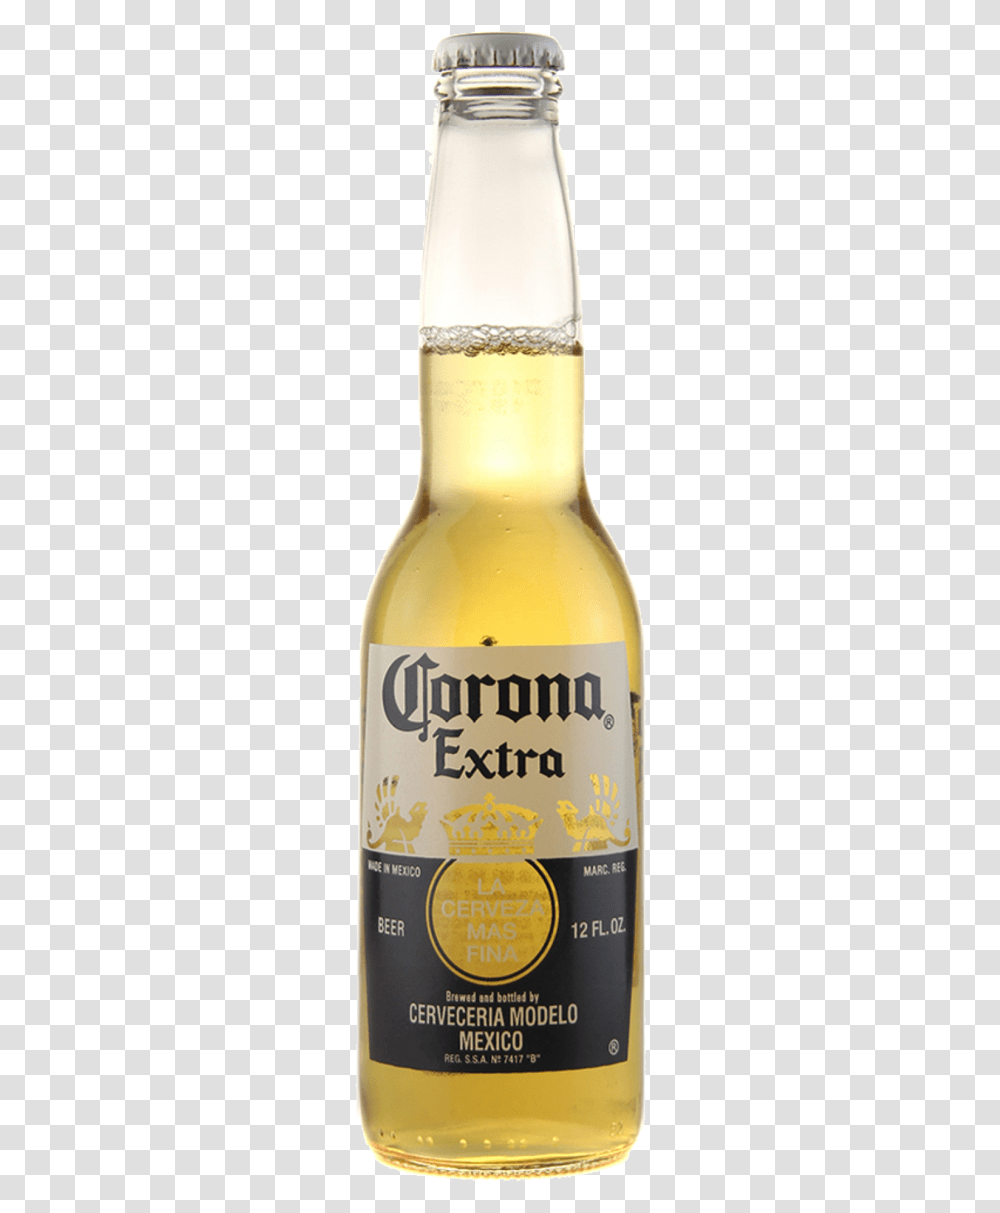 Corona Extra Beer Corona Extra, Alcohol, Beverage, Drink, Bottle Transparent Png